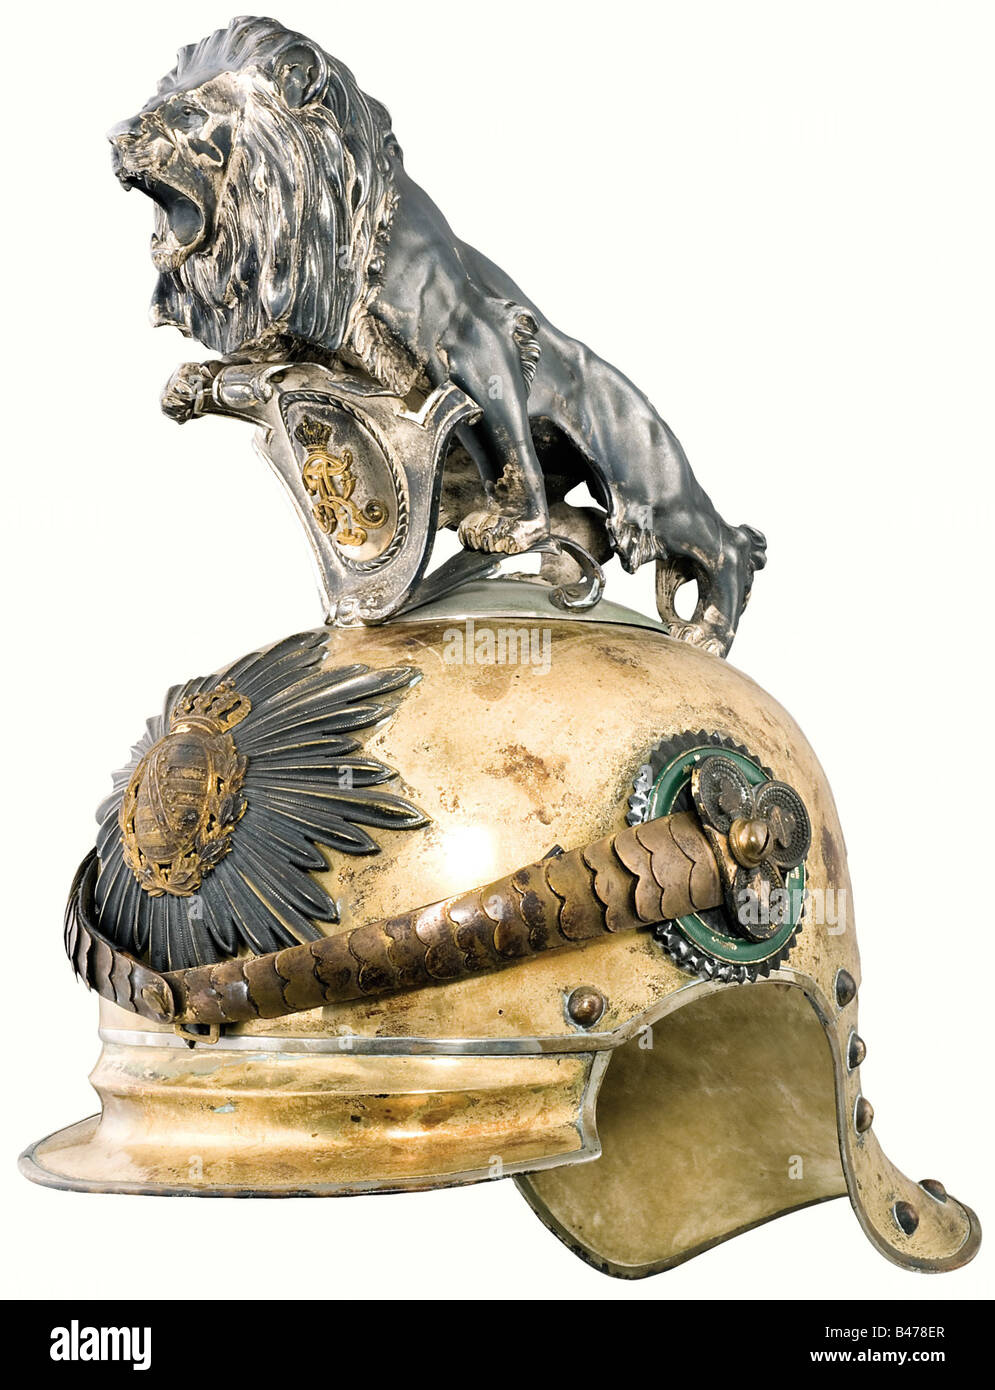 King Friedrich August III, (1865 - 1932). A helmet for an Officer of the Royal Saxon Horse Guard Regiment (1st Heavy Regiment). Gold electroplated tombac helmet skull in a special light version. Silver ceremonial crest in the shape of a lion on a nickel-plated base. Silver-plated star emblem bearing a gold plated coat of arms. Metal chinscales with remnants of gilding on clover leaf shaped rosettes. Officer's cockade. The brim and neck protector are lined with écru coloured velvet. Ribbed silk lining with a somewhat faded monogram, 'F.A.' beneath a crown. Light, Stock Photo